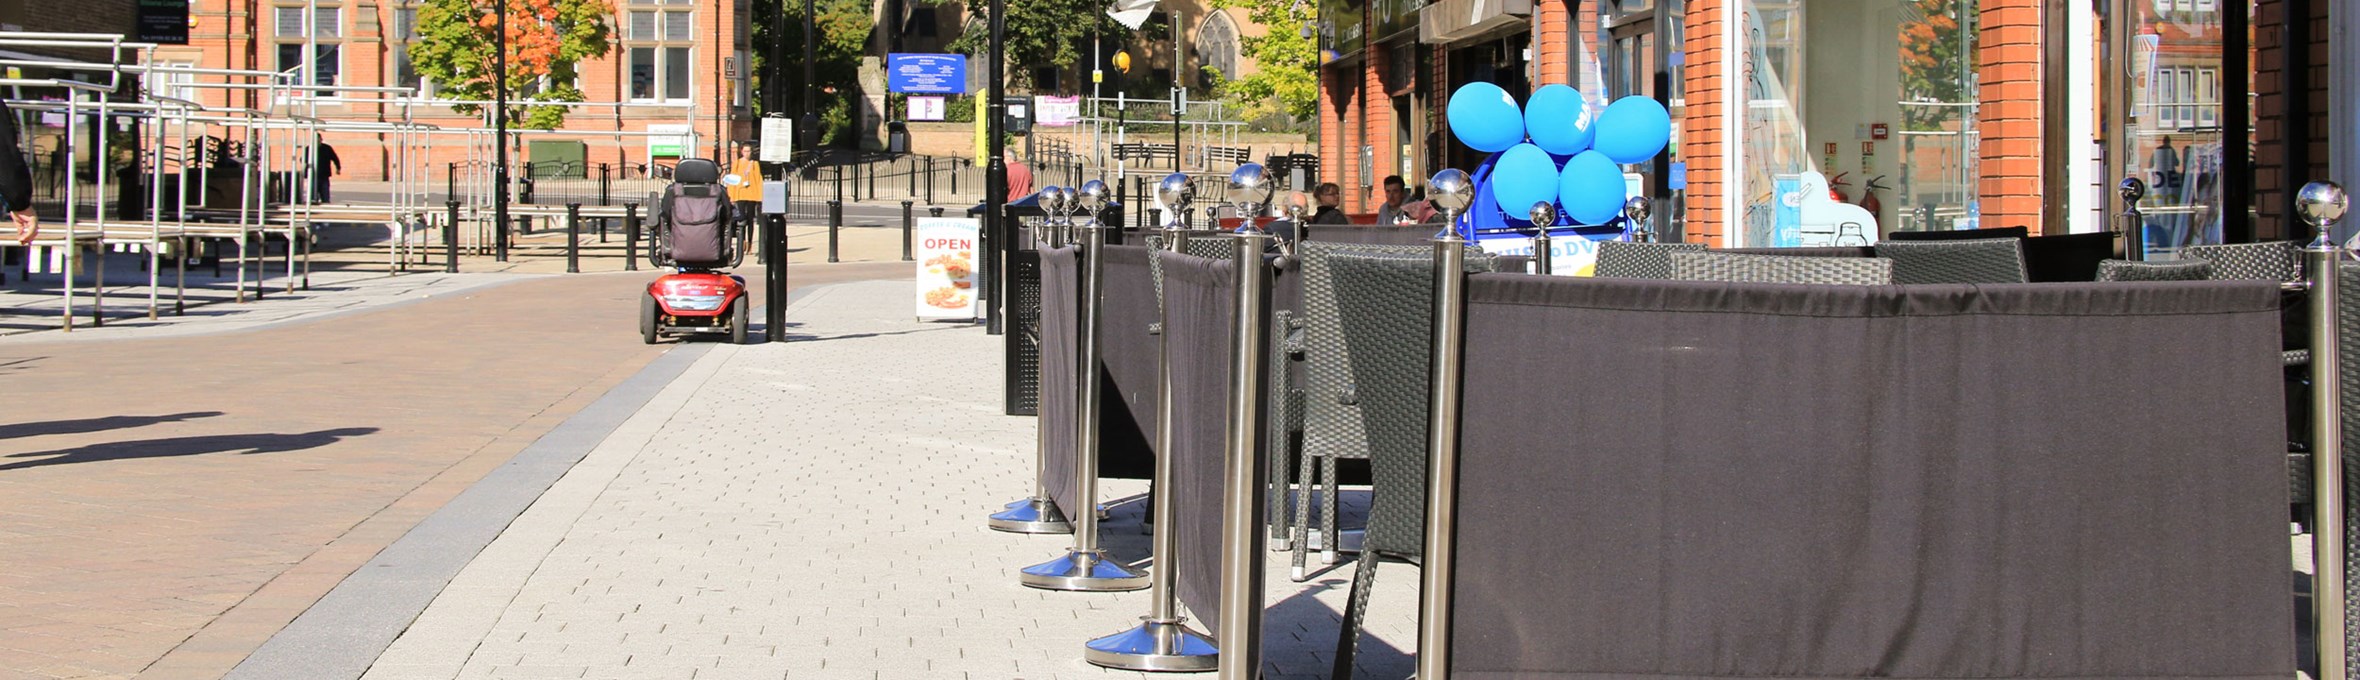 On street cafes in a town centre